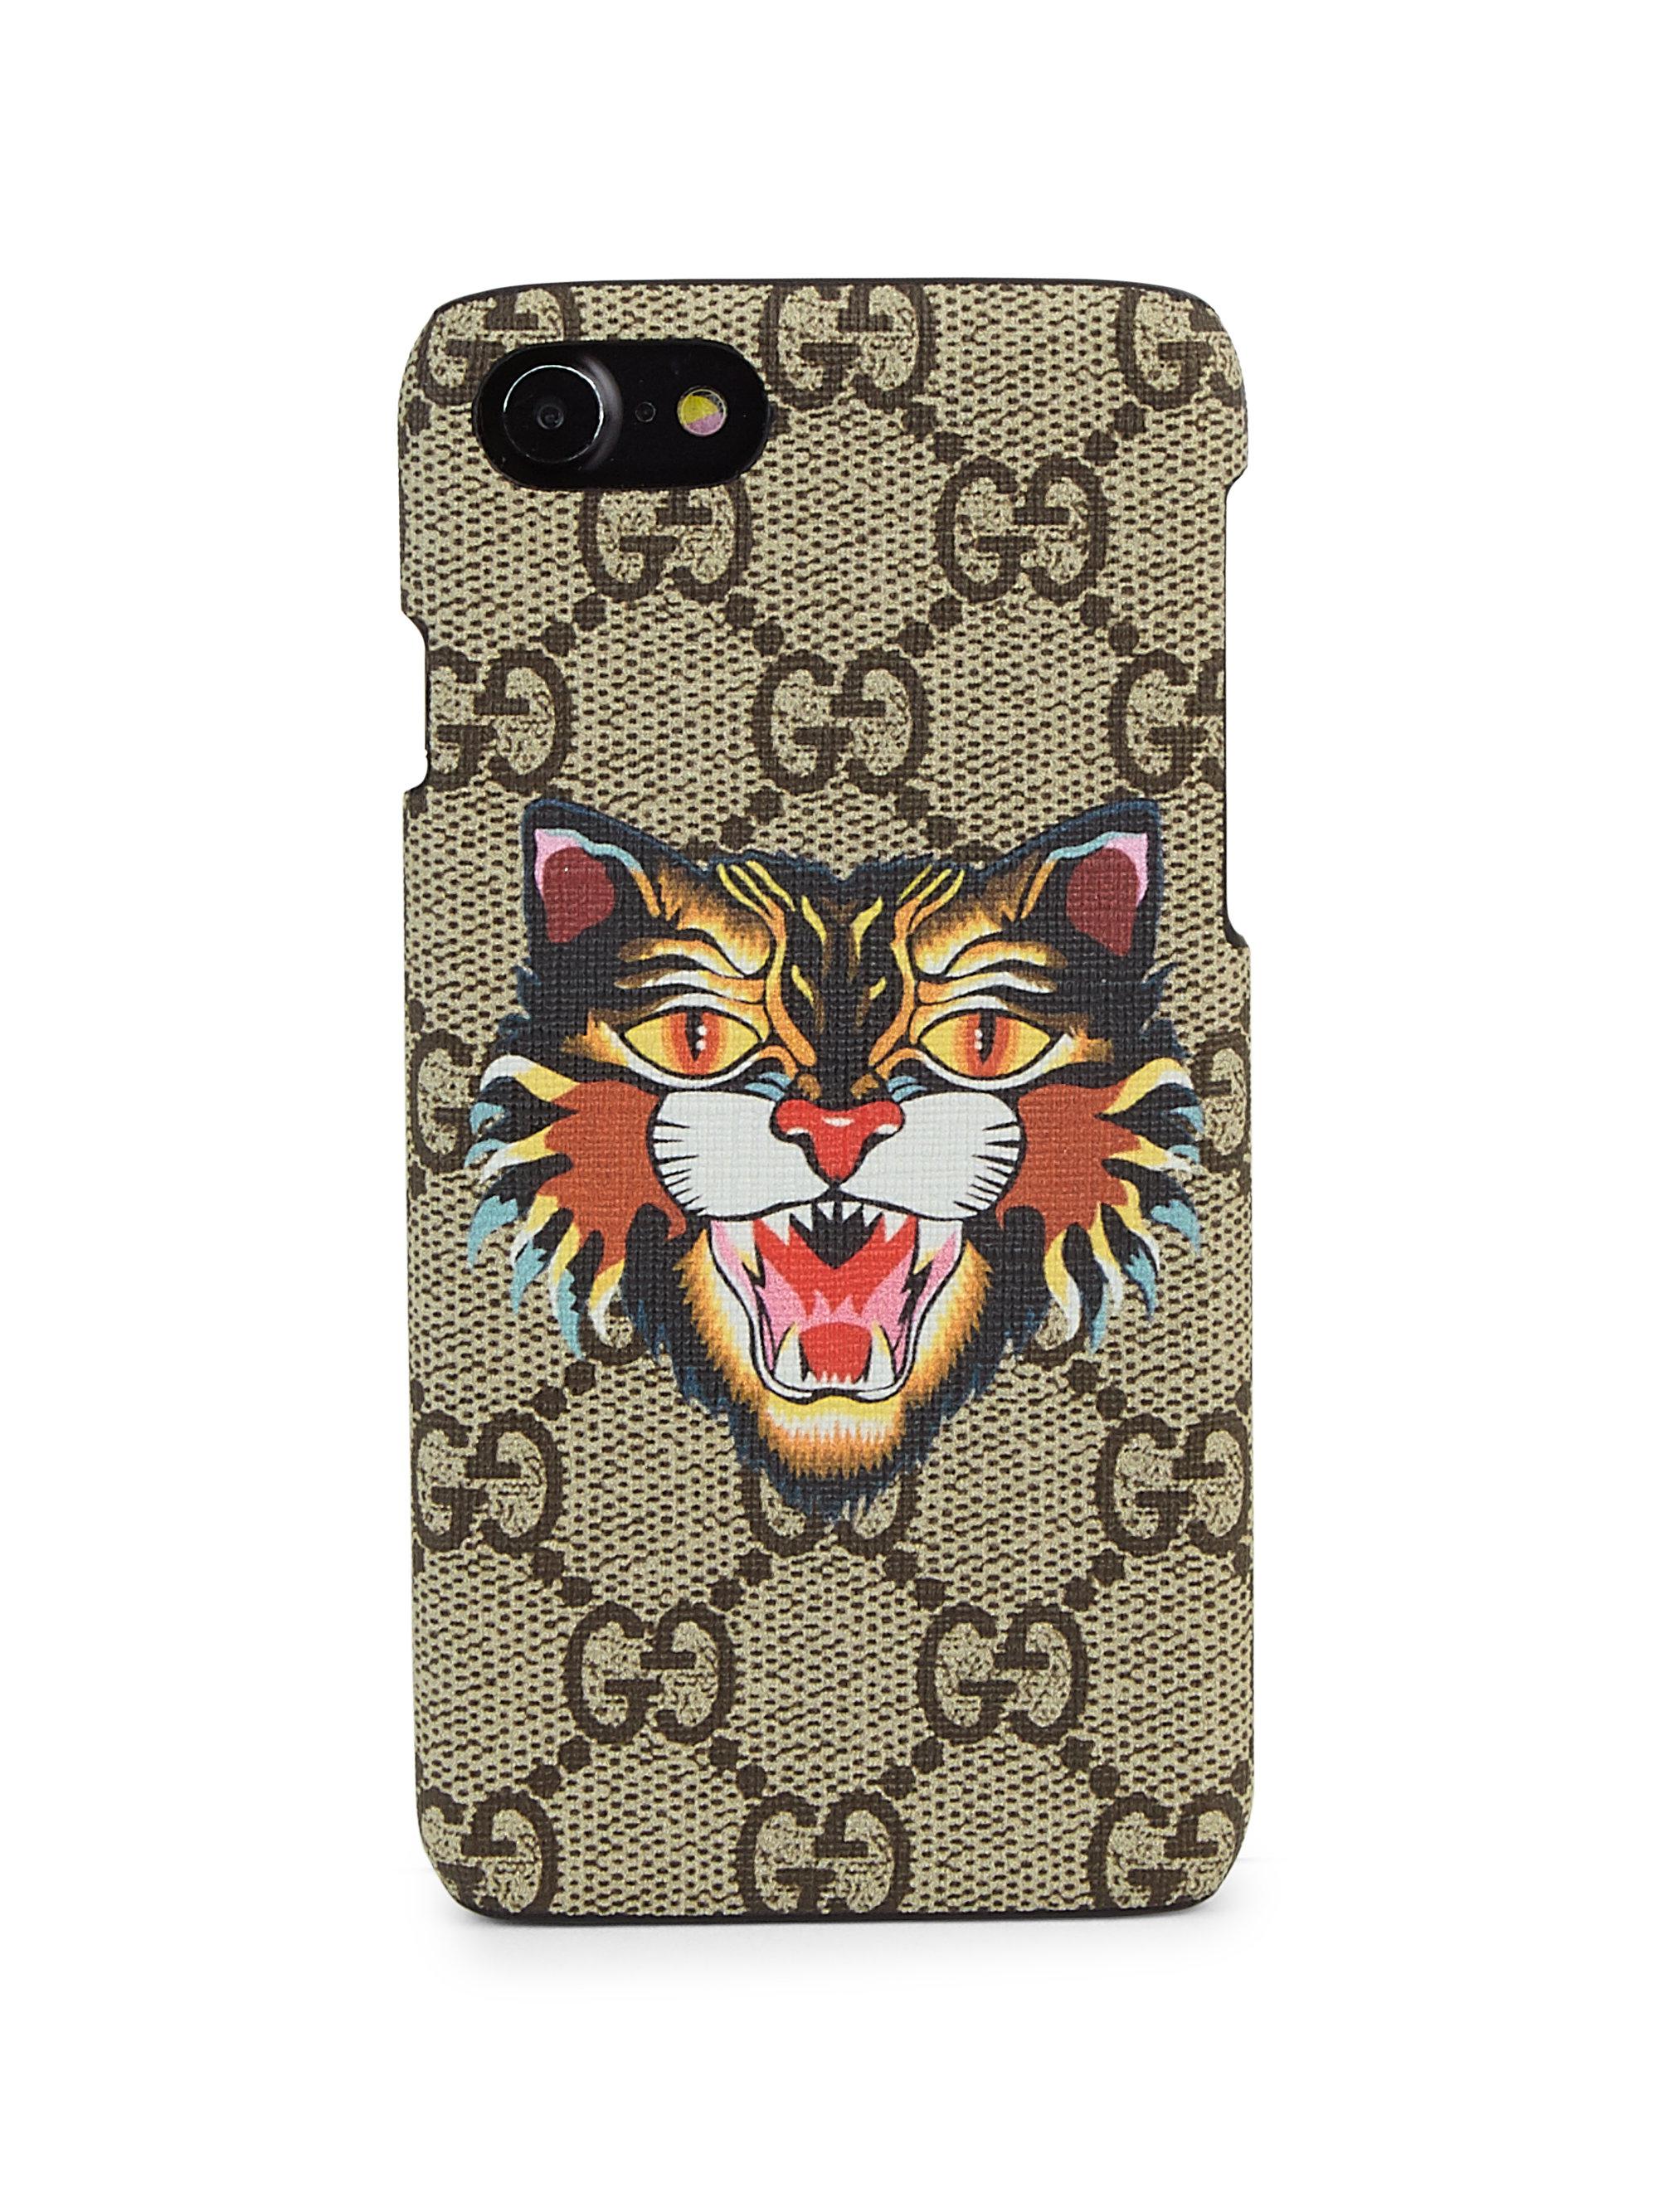 Gucci Canvas Gg Angry Cat Iphone 7 Case 